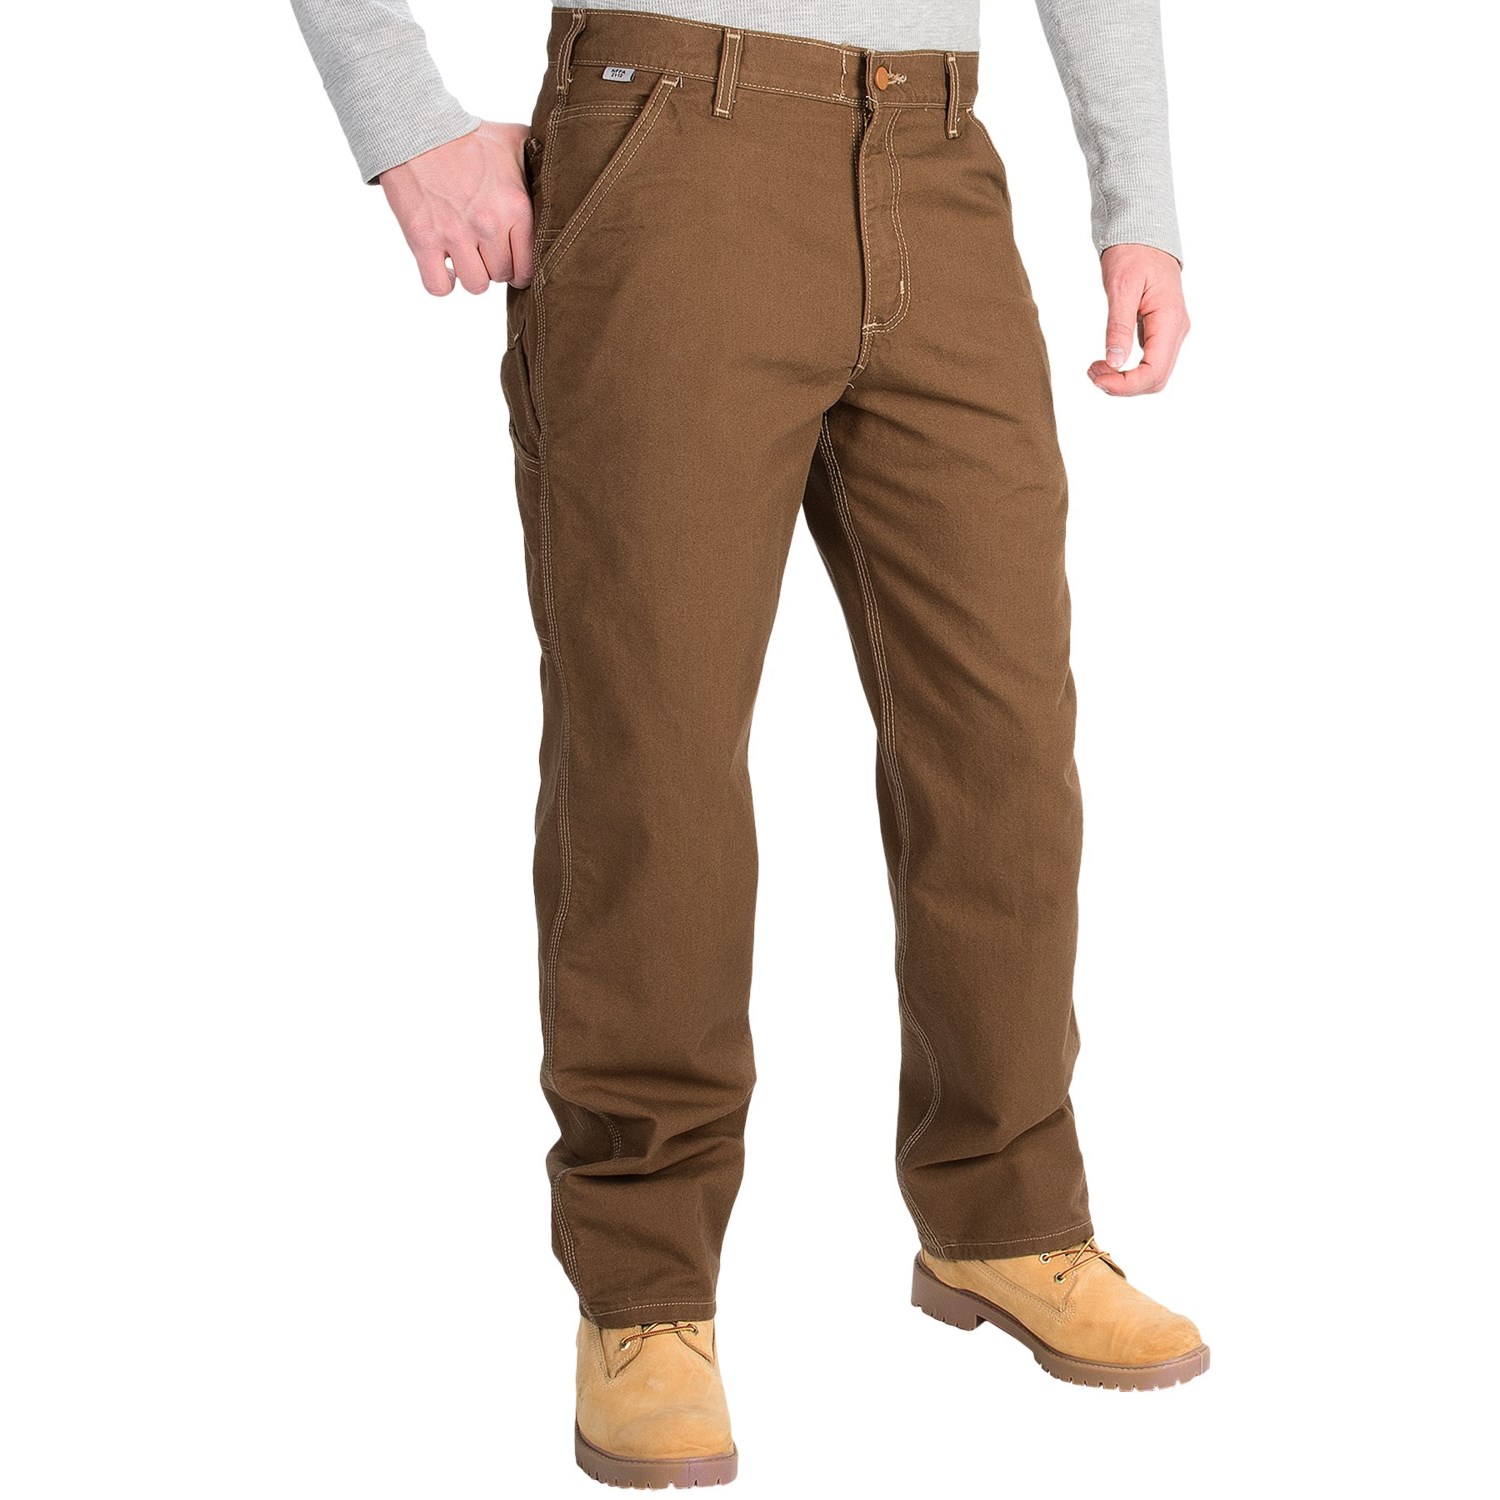 Carhartt Flame-Resistant Washed Duck Work Dungaree Pants (For Men)